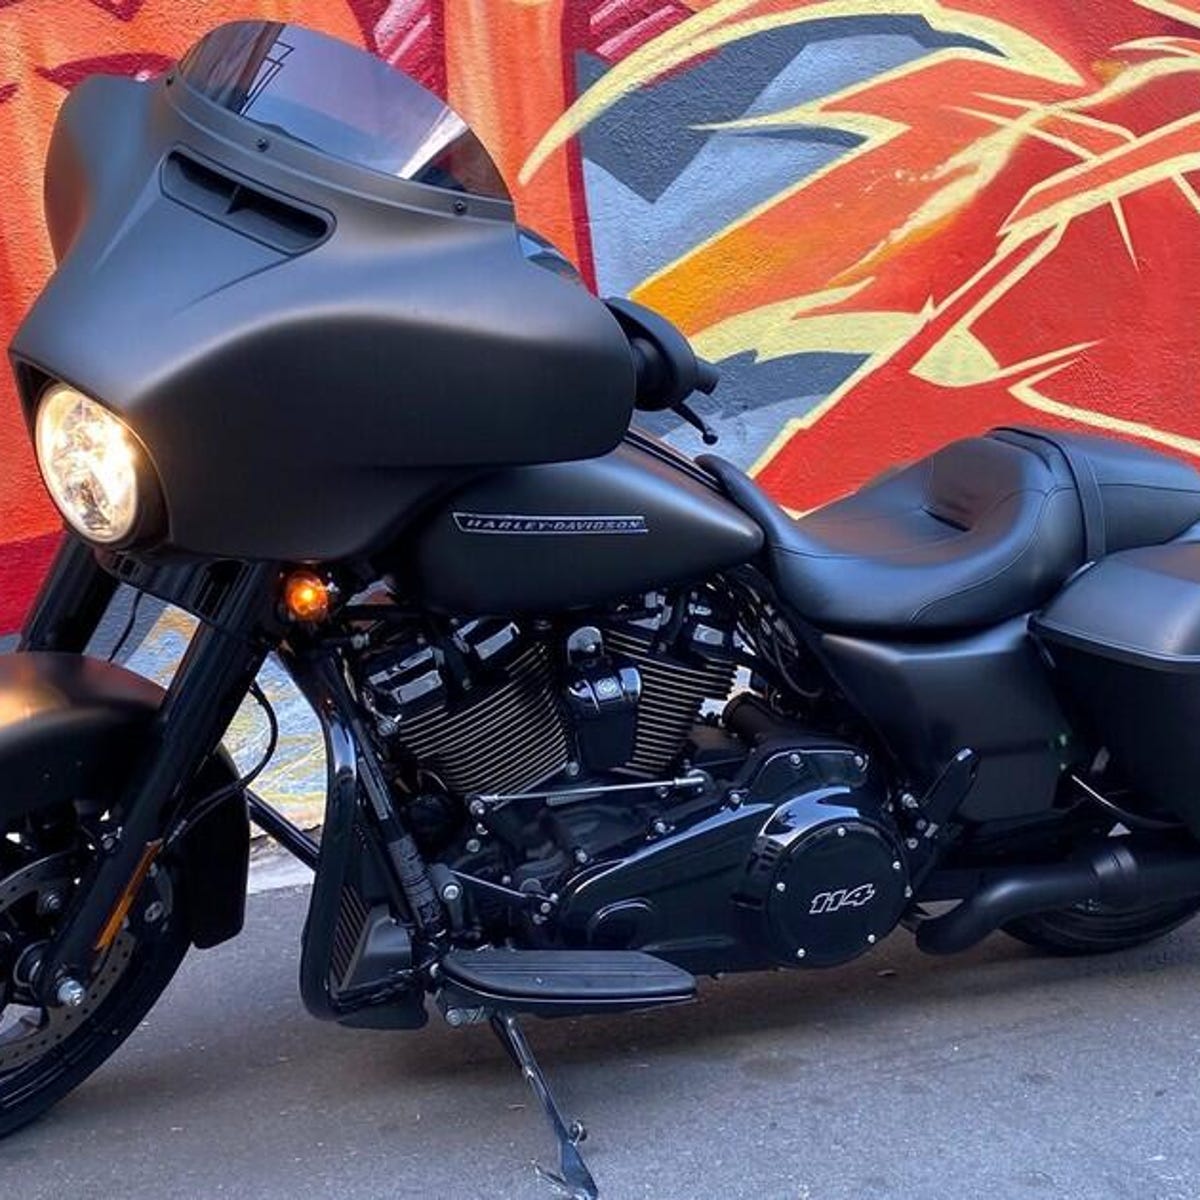 2019 Harley-Davidson Street Glide Special review: Wild hogs can't be broken  - CNET